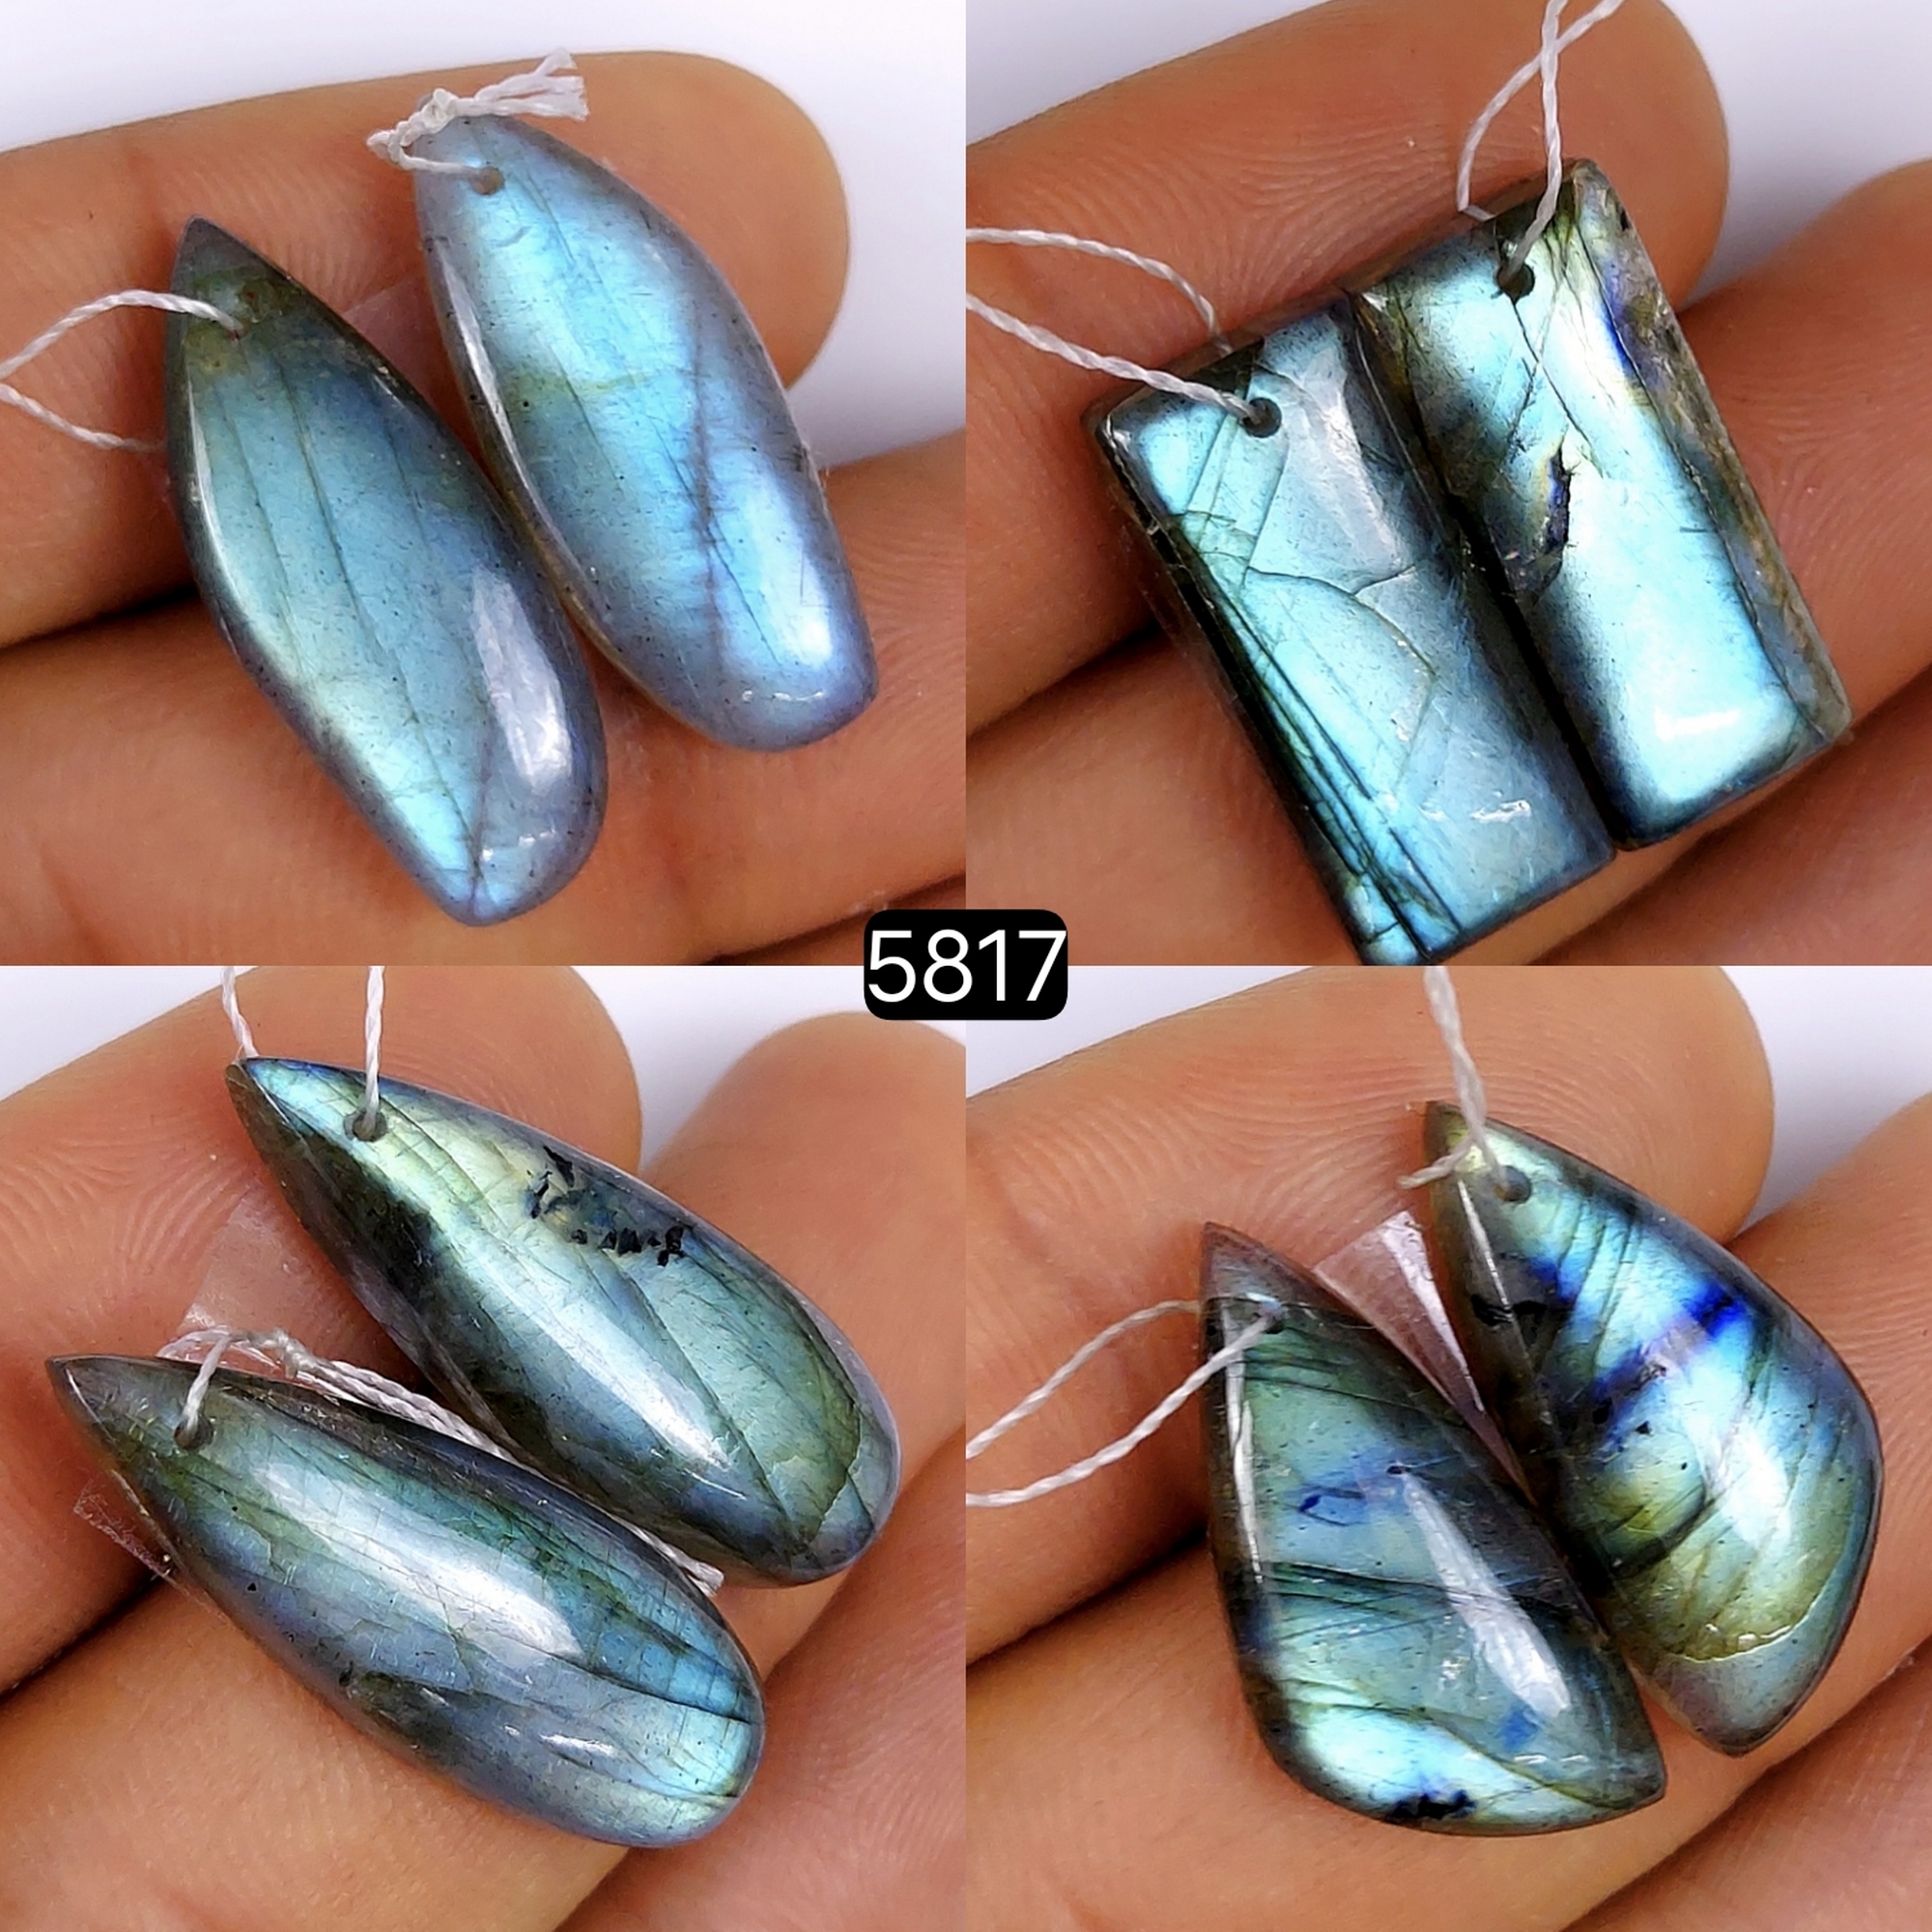 4 pair 104Cts Natural Labradorite Dangle Earrings, Labradorite Jewelry Gemstone Cabochon Earrings Matching pair Front To Back Drill Earring 27x11 24x14mm #5817